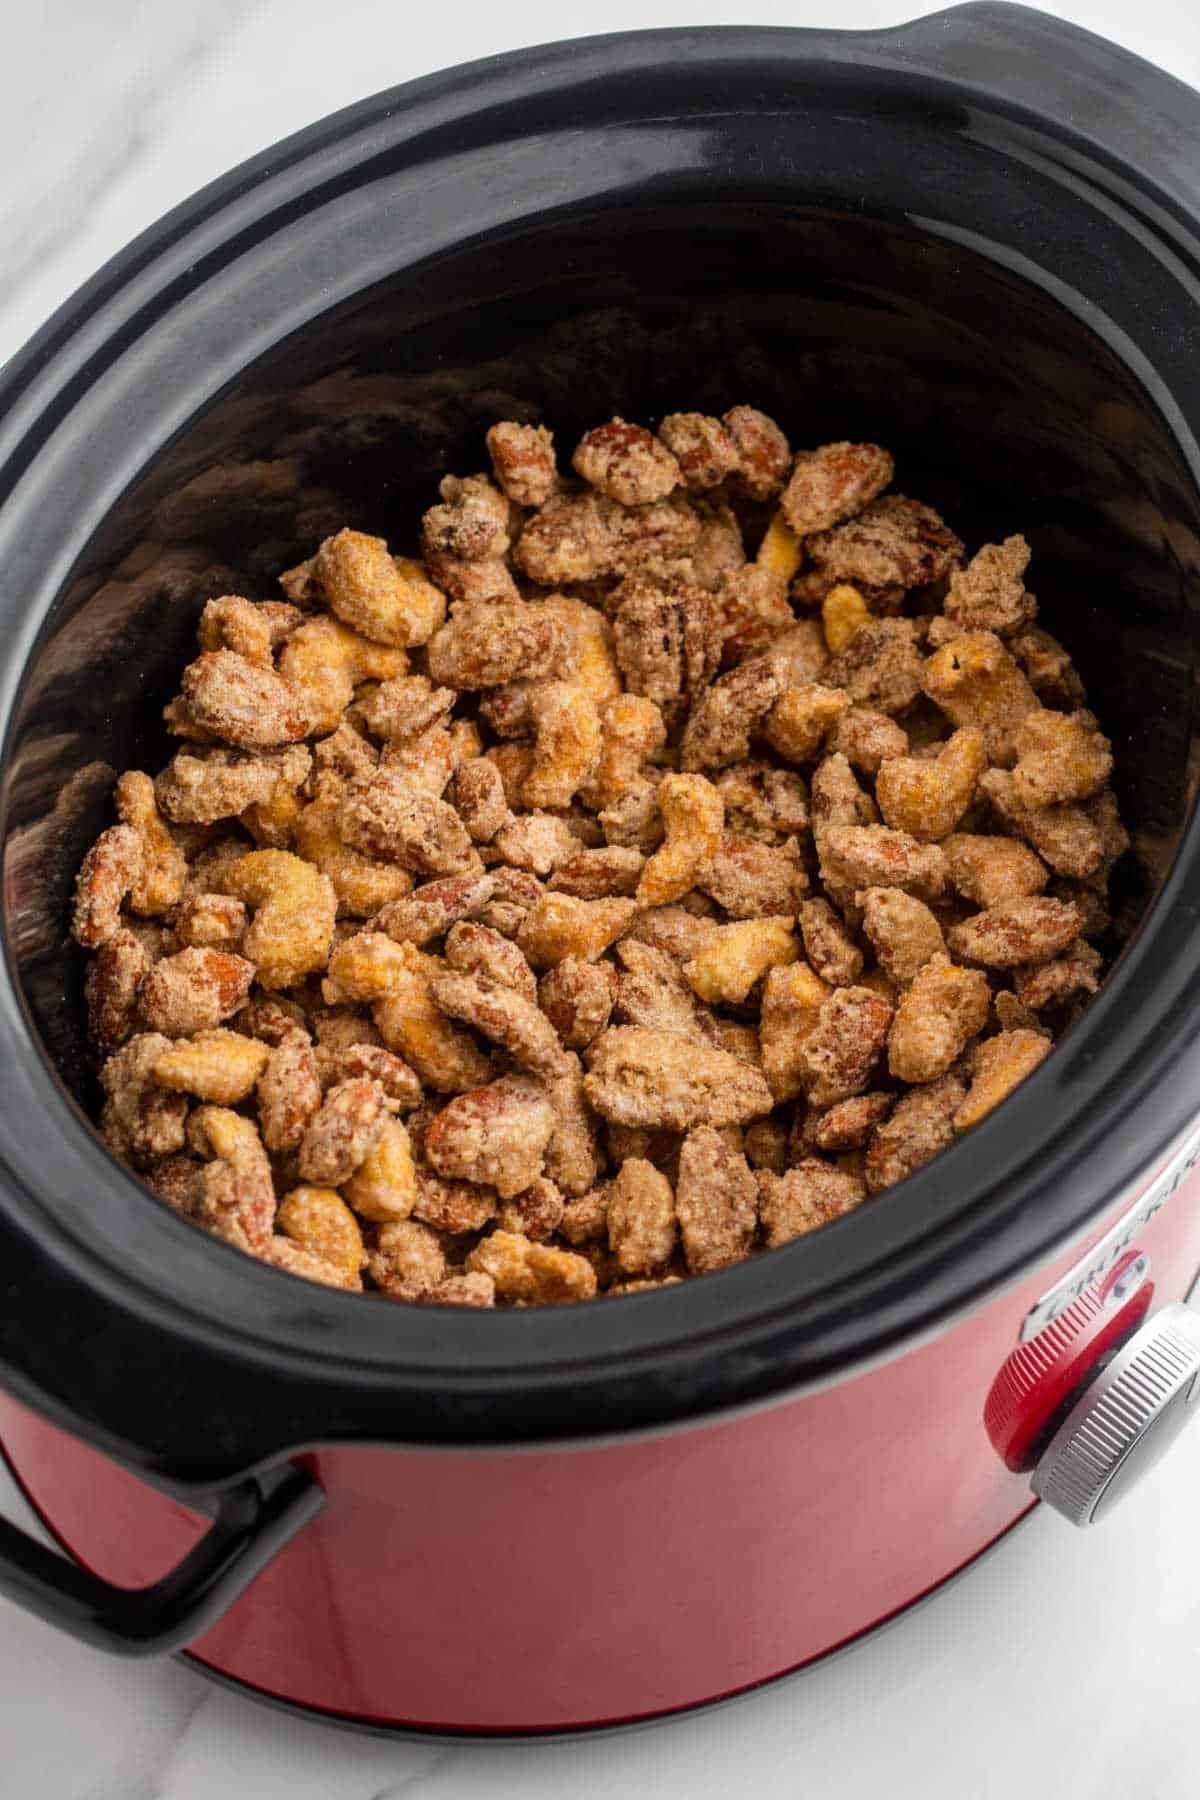 Candied nuts in a crockpot.